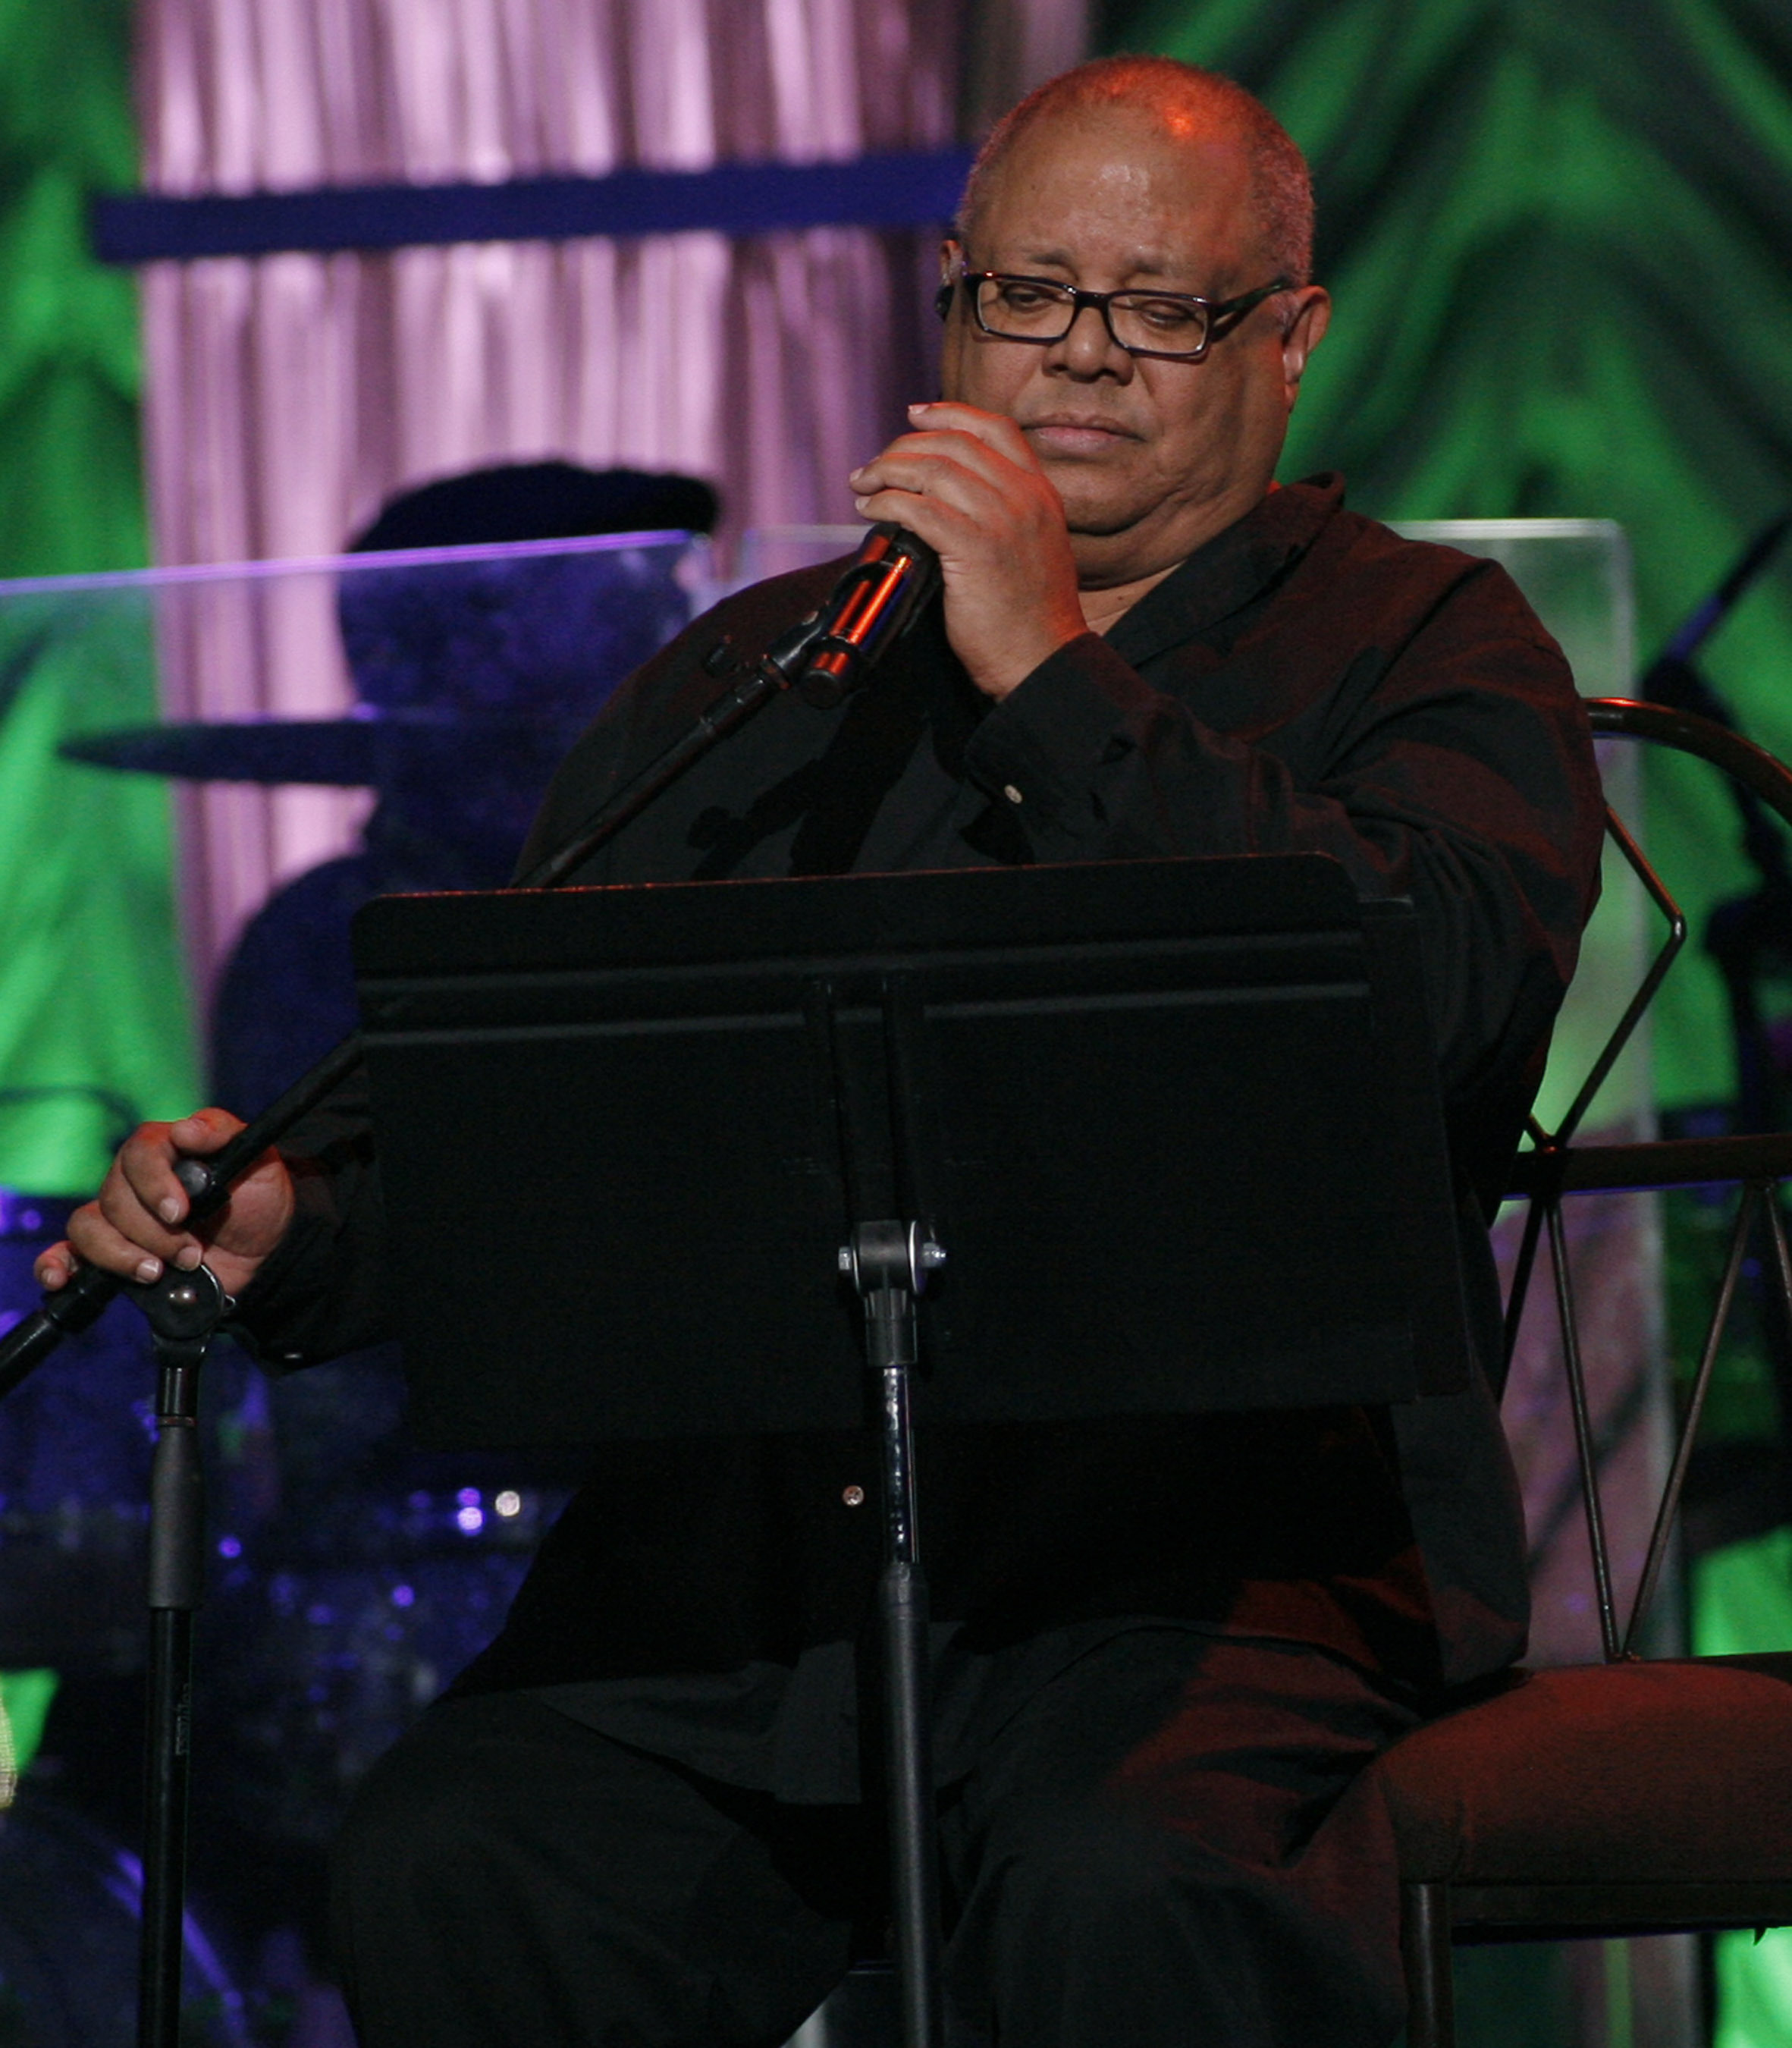 Cuban singer Pablo Milanés during a concert on August 27, 2011 in Miami.  Milanés died in Madrid on November 22, 2022, his office reported.  He was 79 years old.  (AP Photo/Jeffrey M. Boan, File)